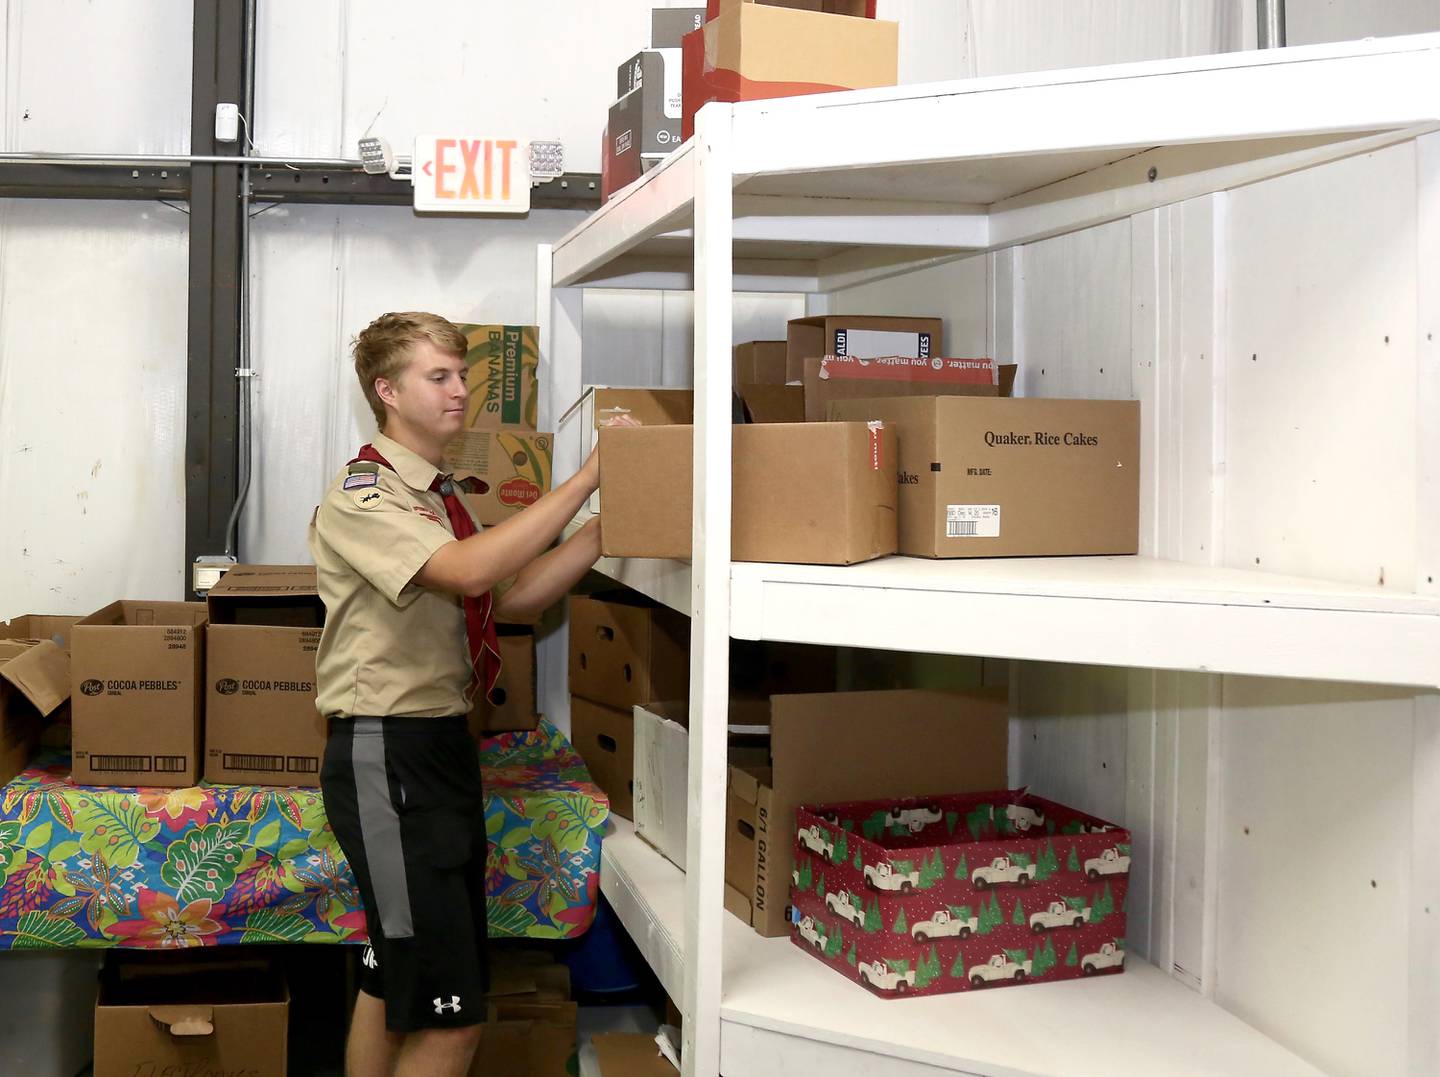 Billy Eby arranges boxes on shelves he built as part of his Eagle Scout project at the Between Friends food pantry in Sugar Grove, Wednesday, June 8, 2022.